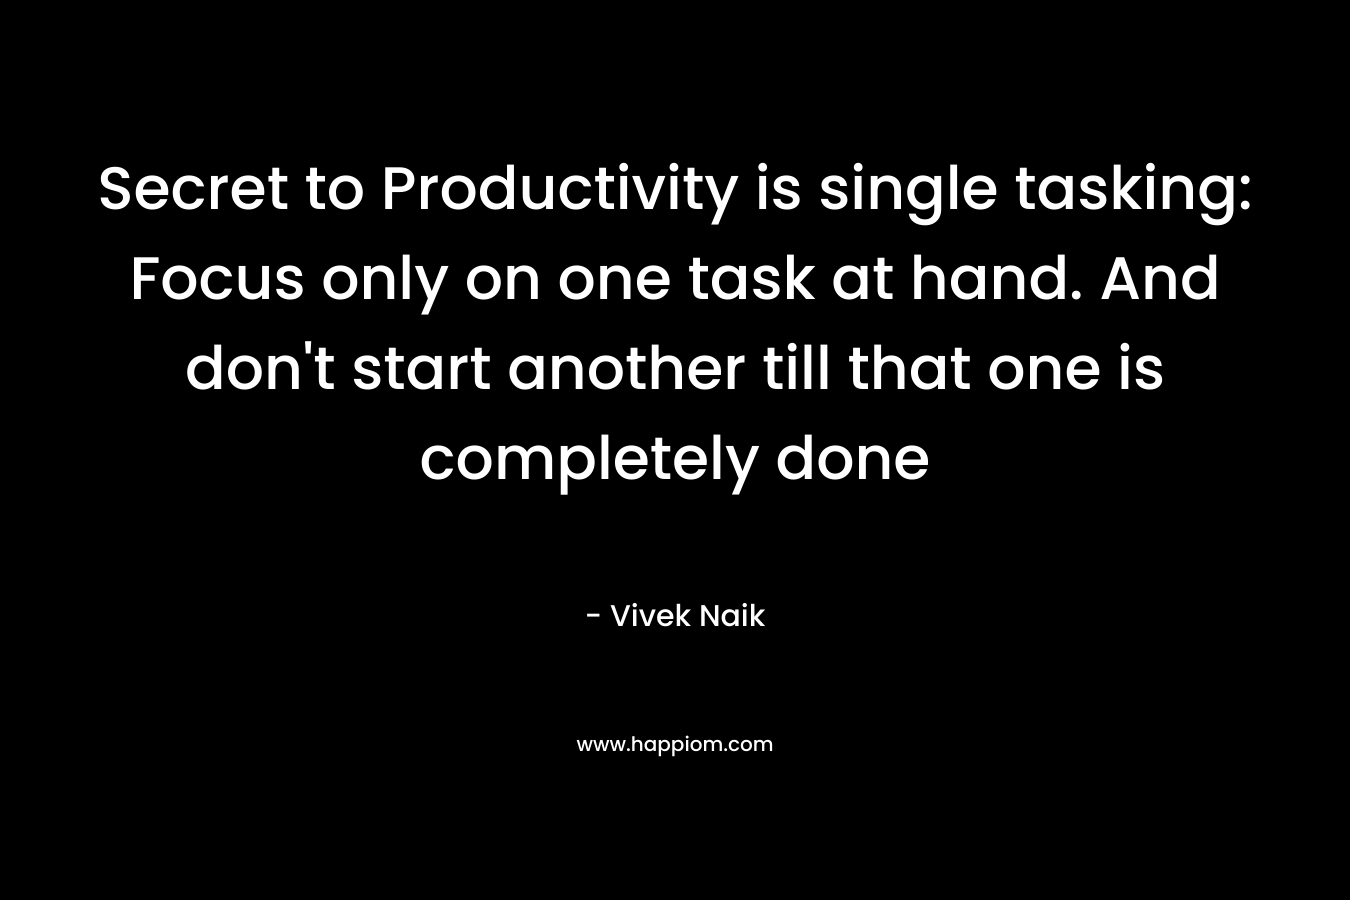 Secret to Productivity is single tasking: Focus only on one task at hand. And don't start another till that one is completely done